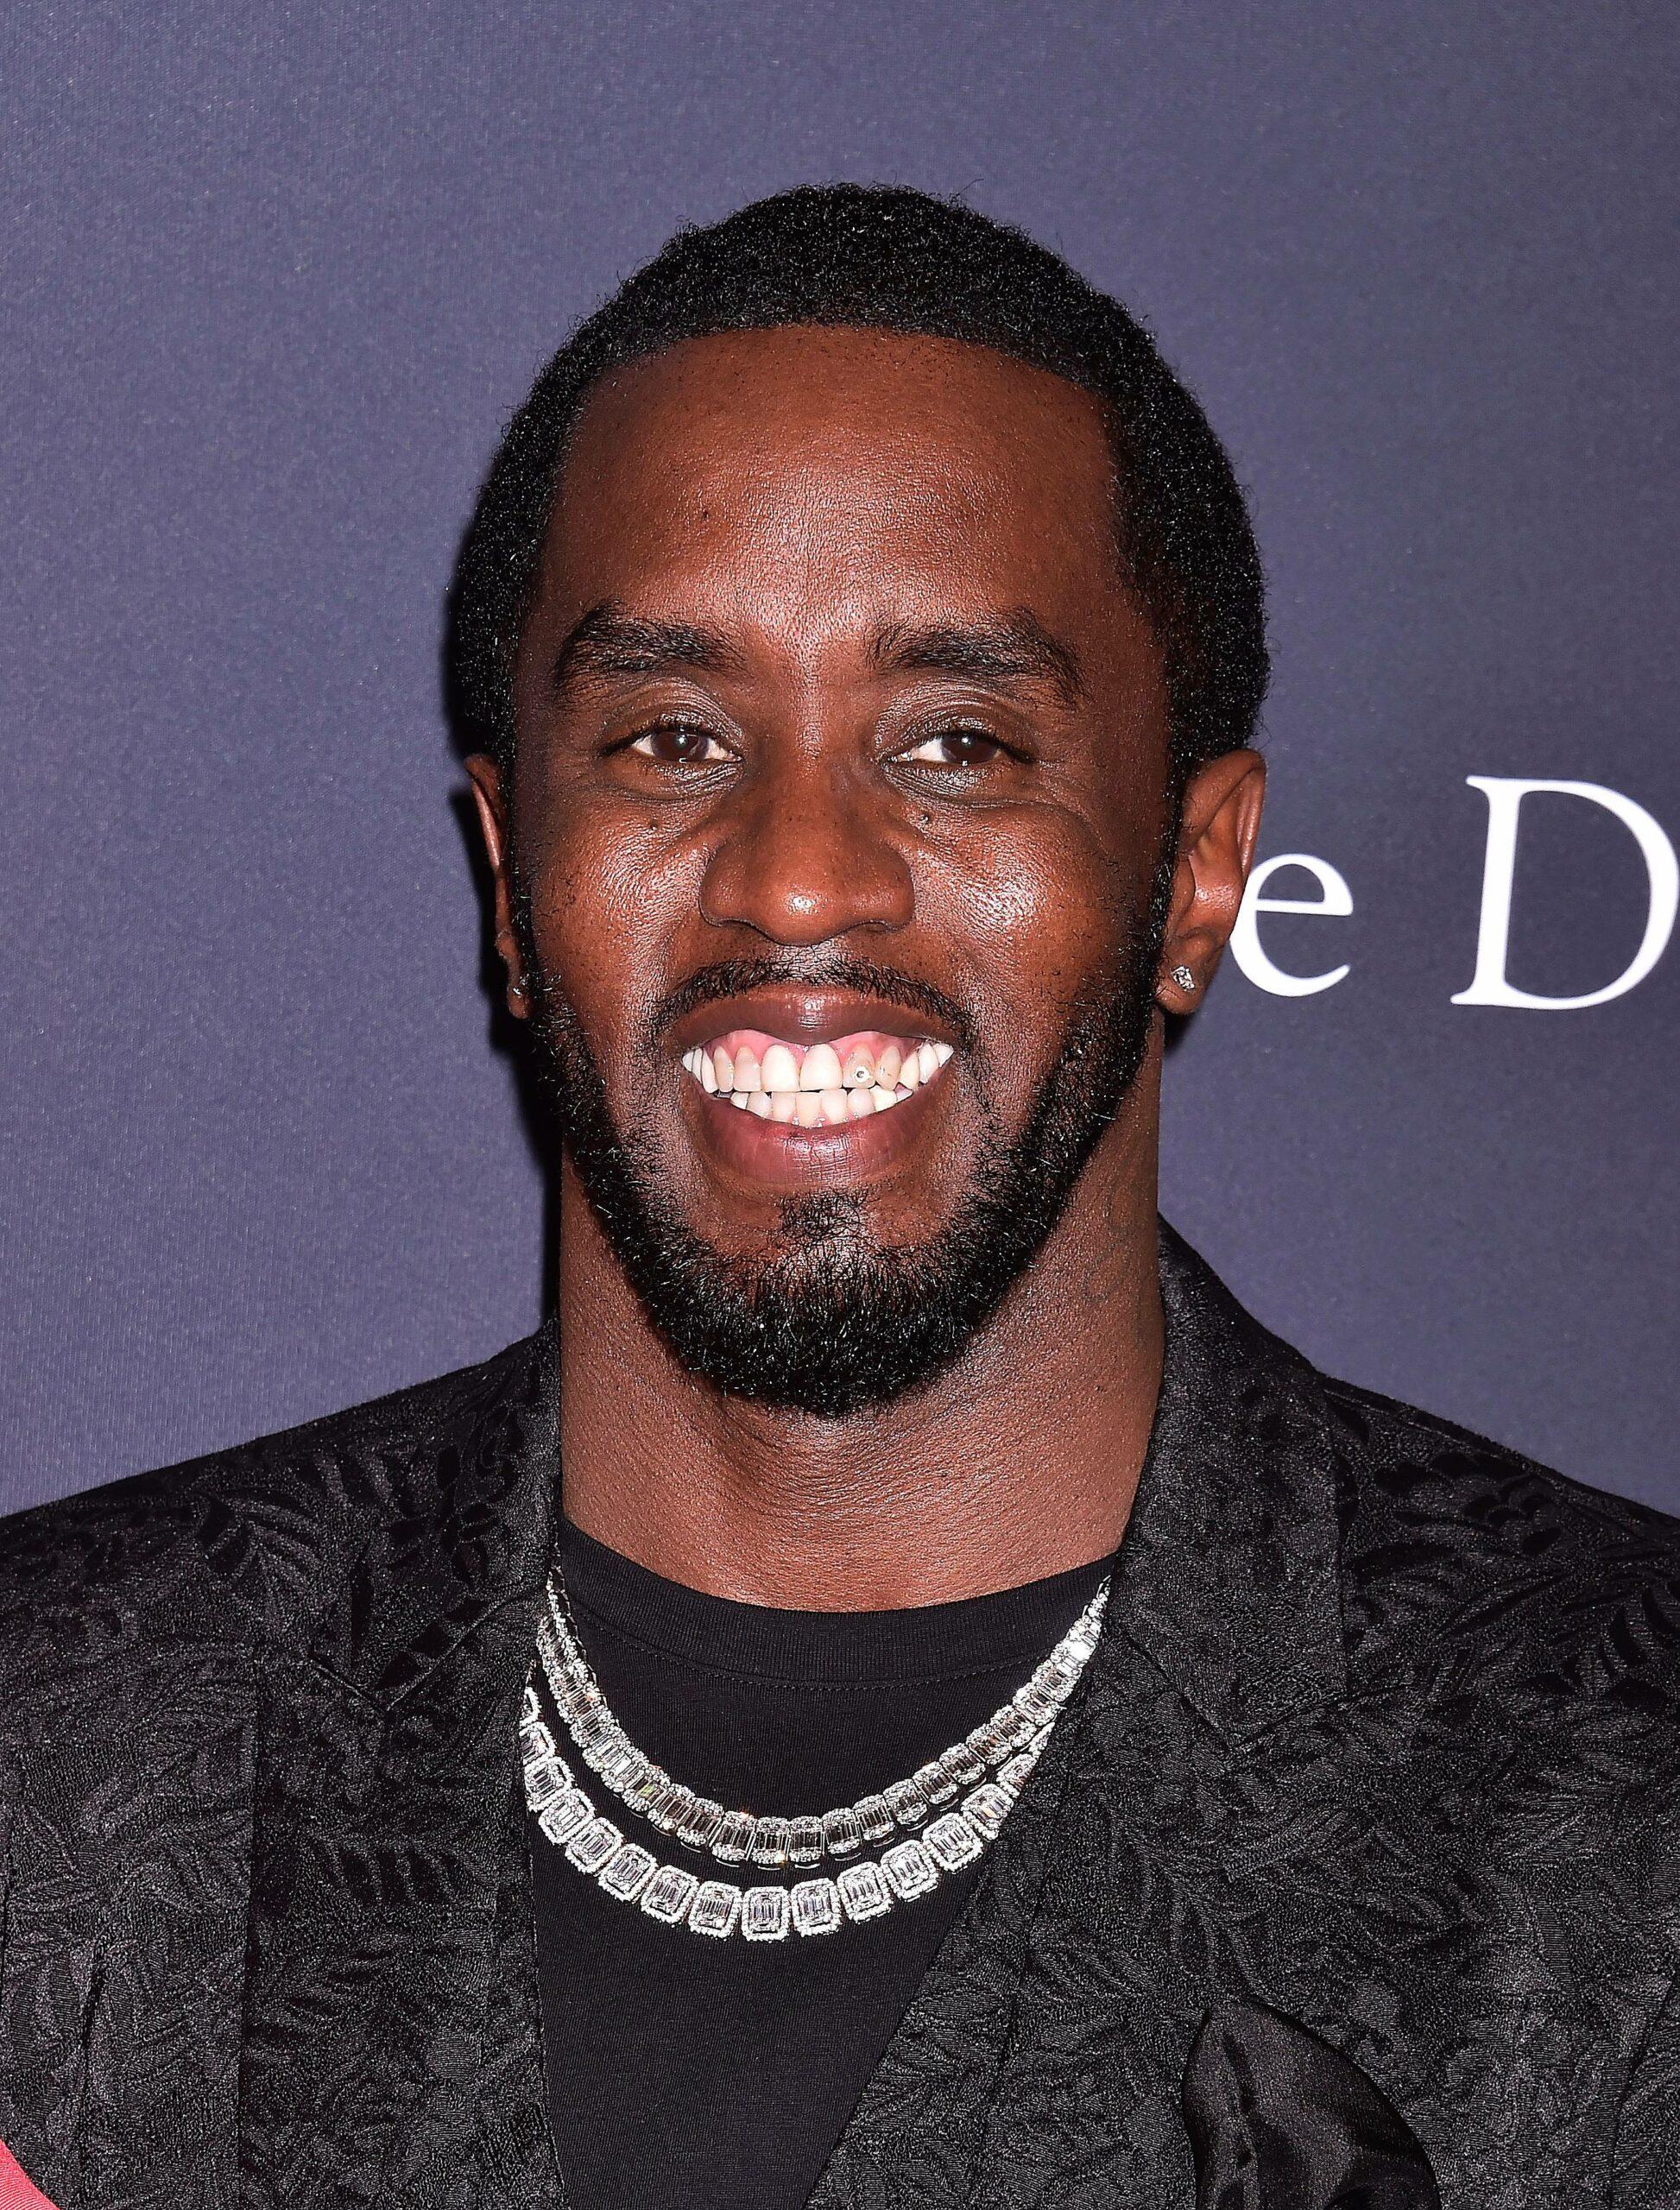 Diddy Plans To Skip Grammy Awards Amid Sexual Assault Allegations